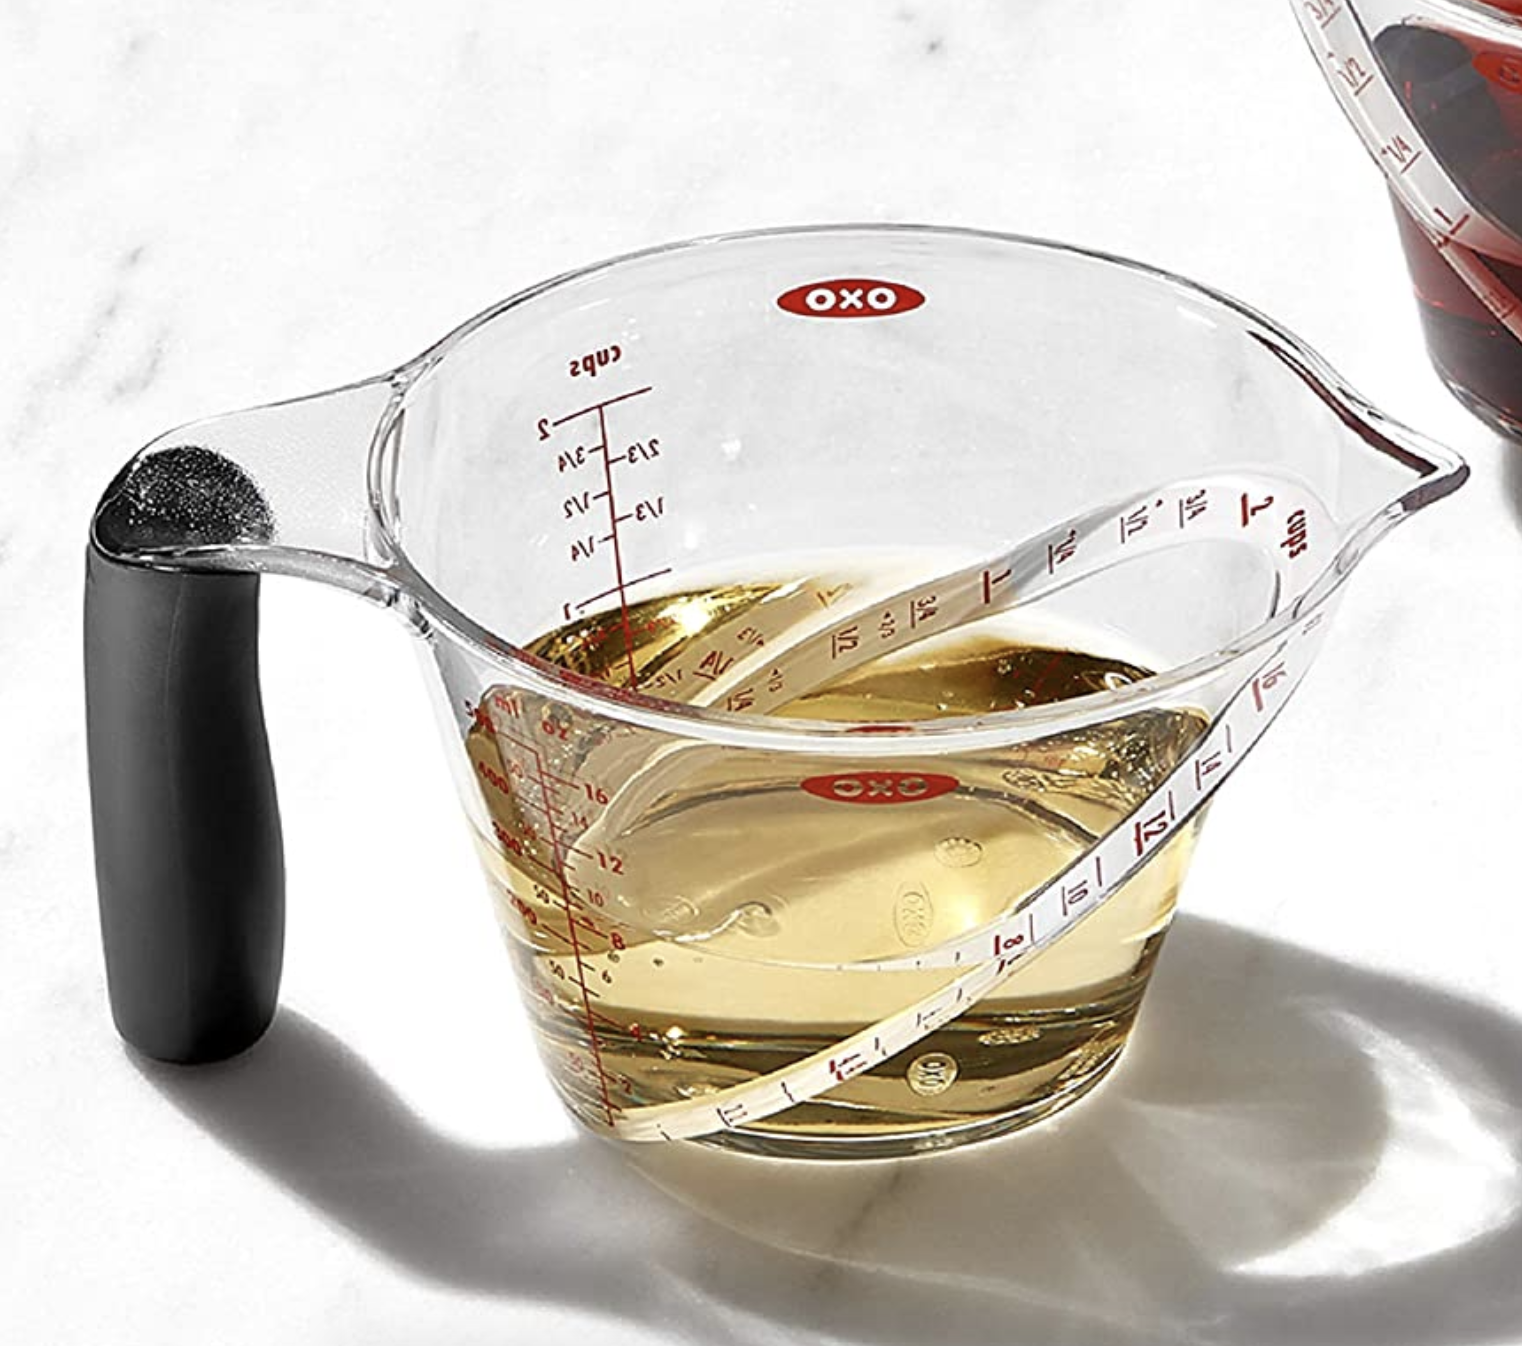 The transparent angled measuring cup with oil inside 